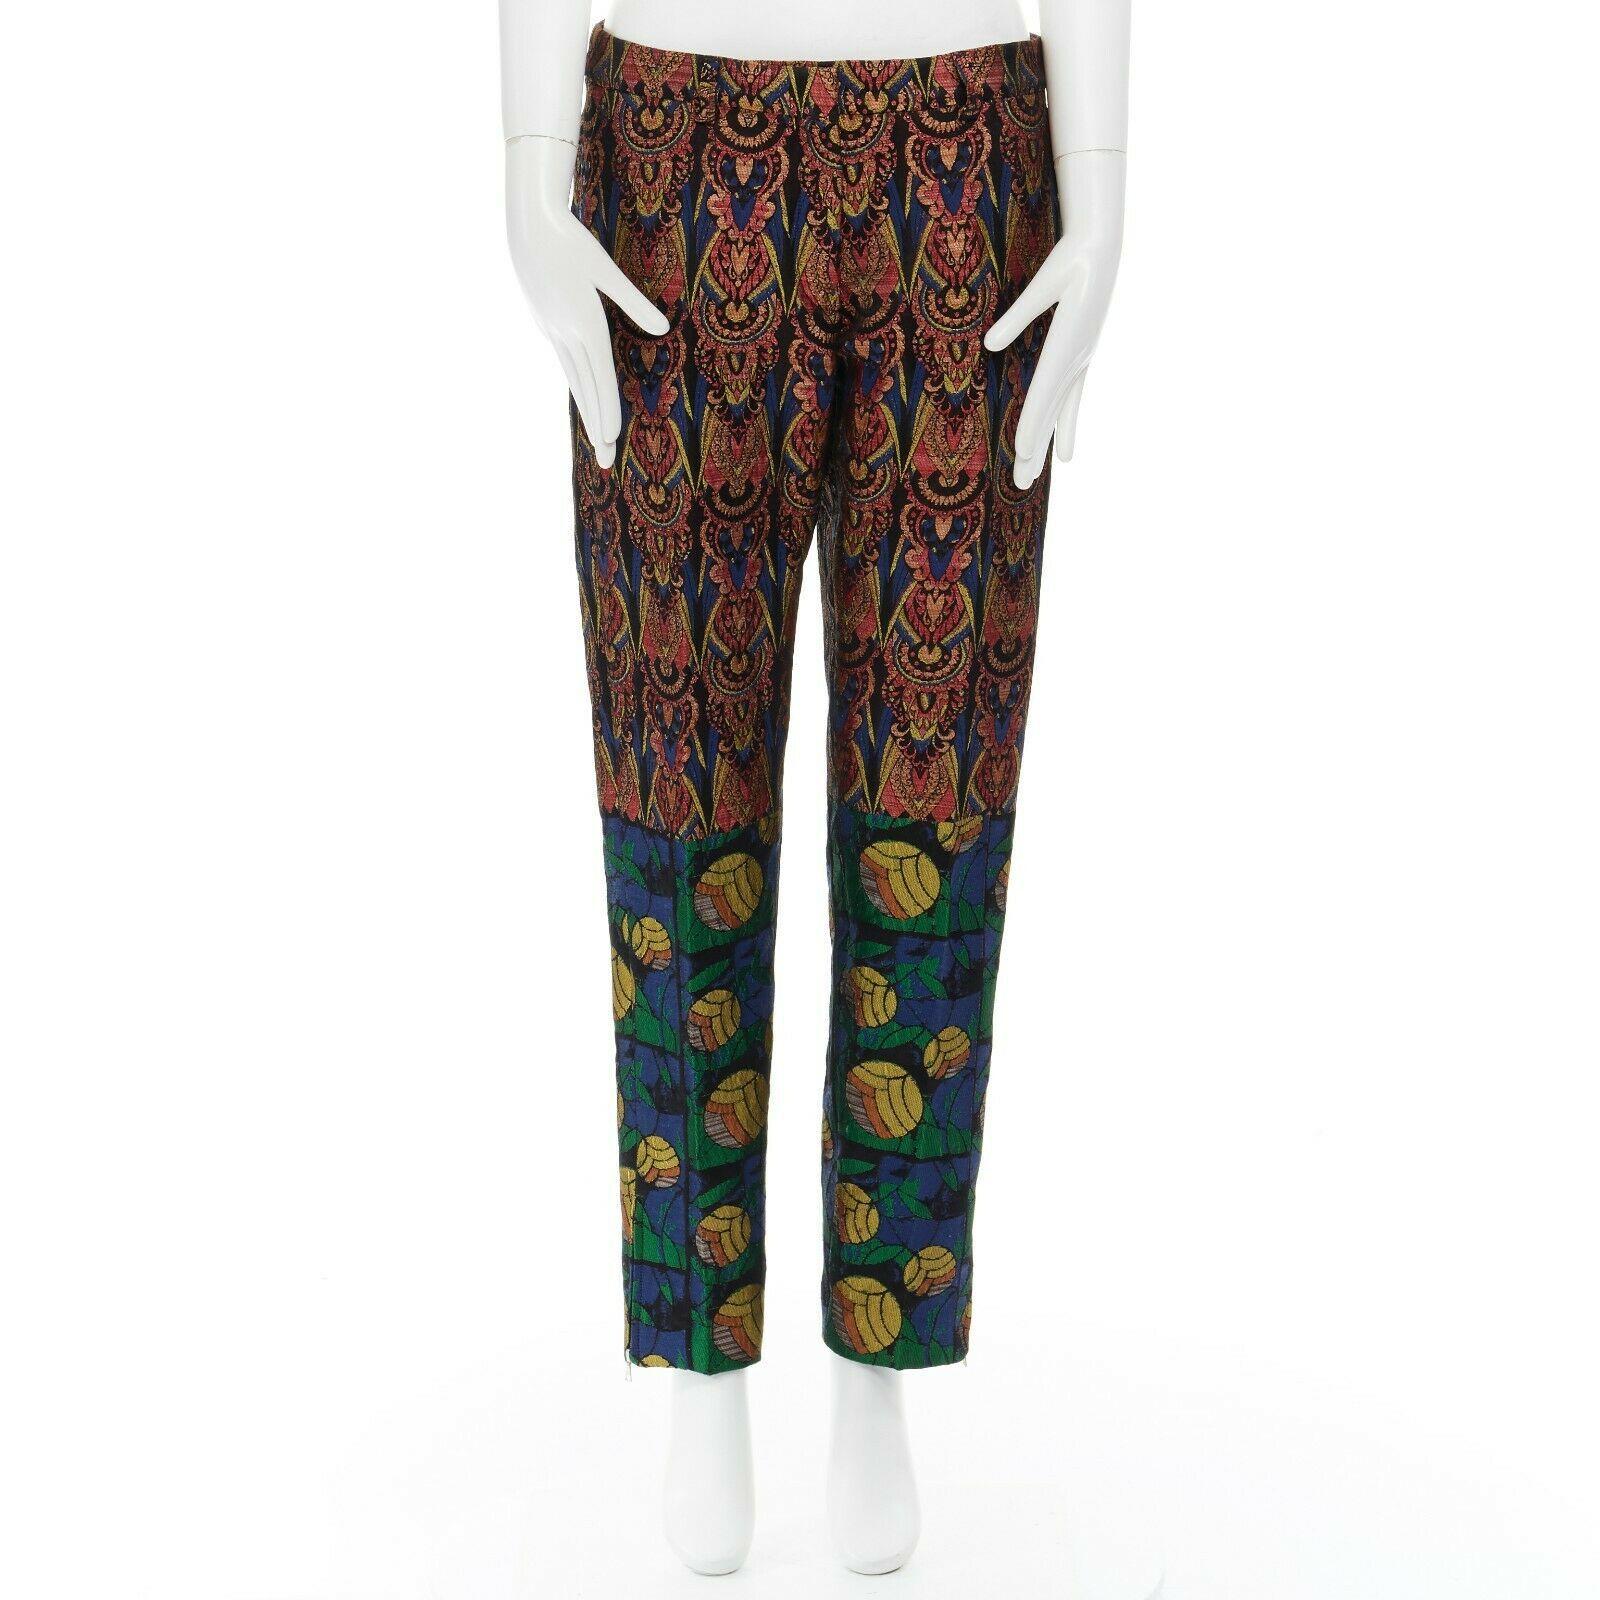 new DRIES VAN NOTEN Runway SS15 boho tribal tapestry jacquard slim pants FR38 S

DRIES VAN NOTEN
FROM THE SPRING SUMMER 2016 COLLECTION
'Perdo' pants . Cotton, polyester, viscose, polyamide . 
Bohemian tribal tapestry inspired fabric . textured